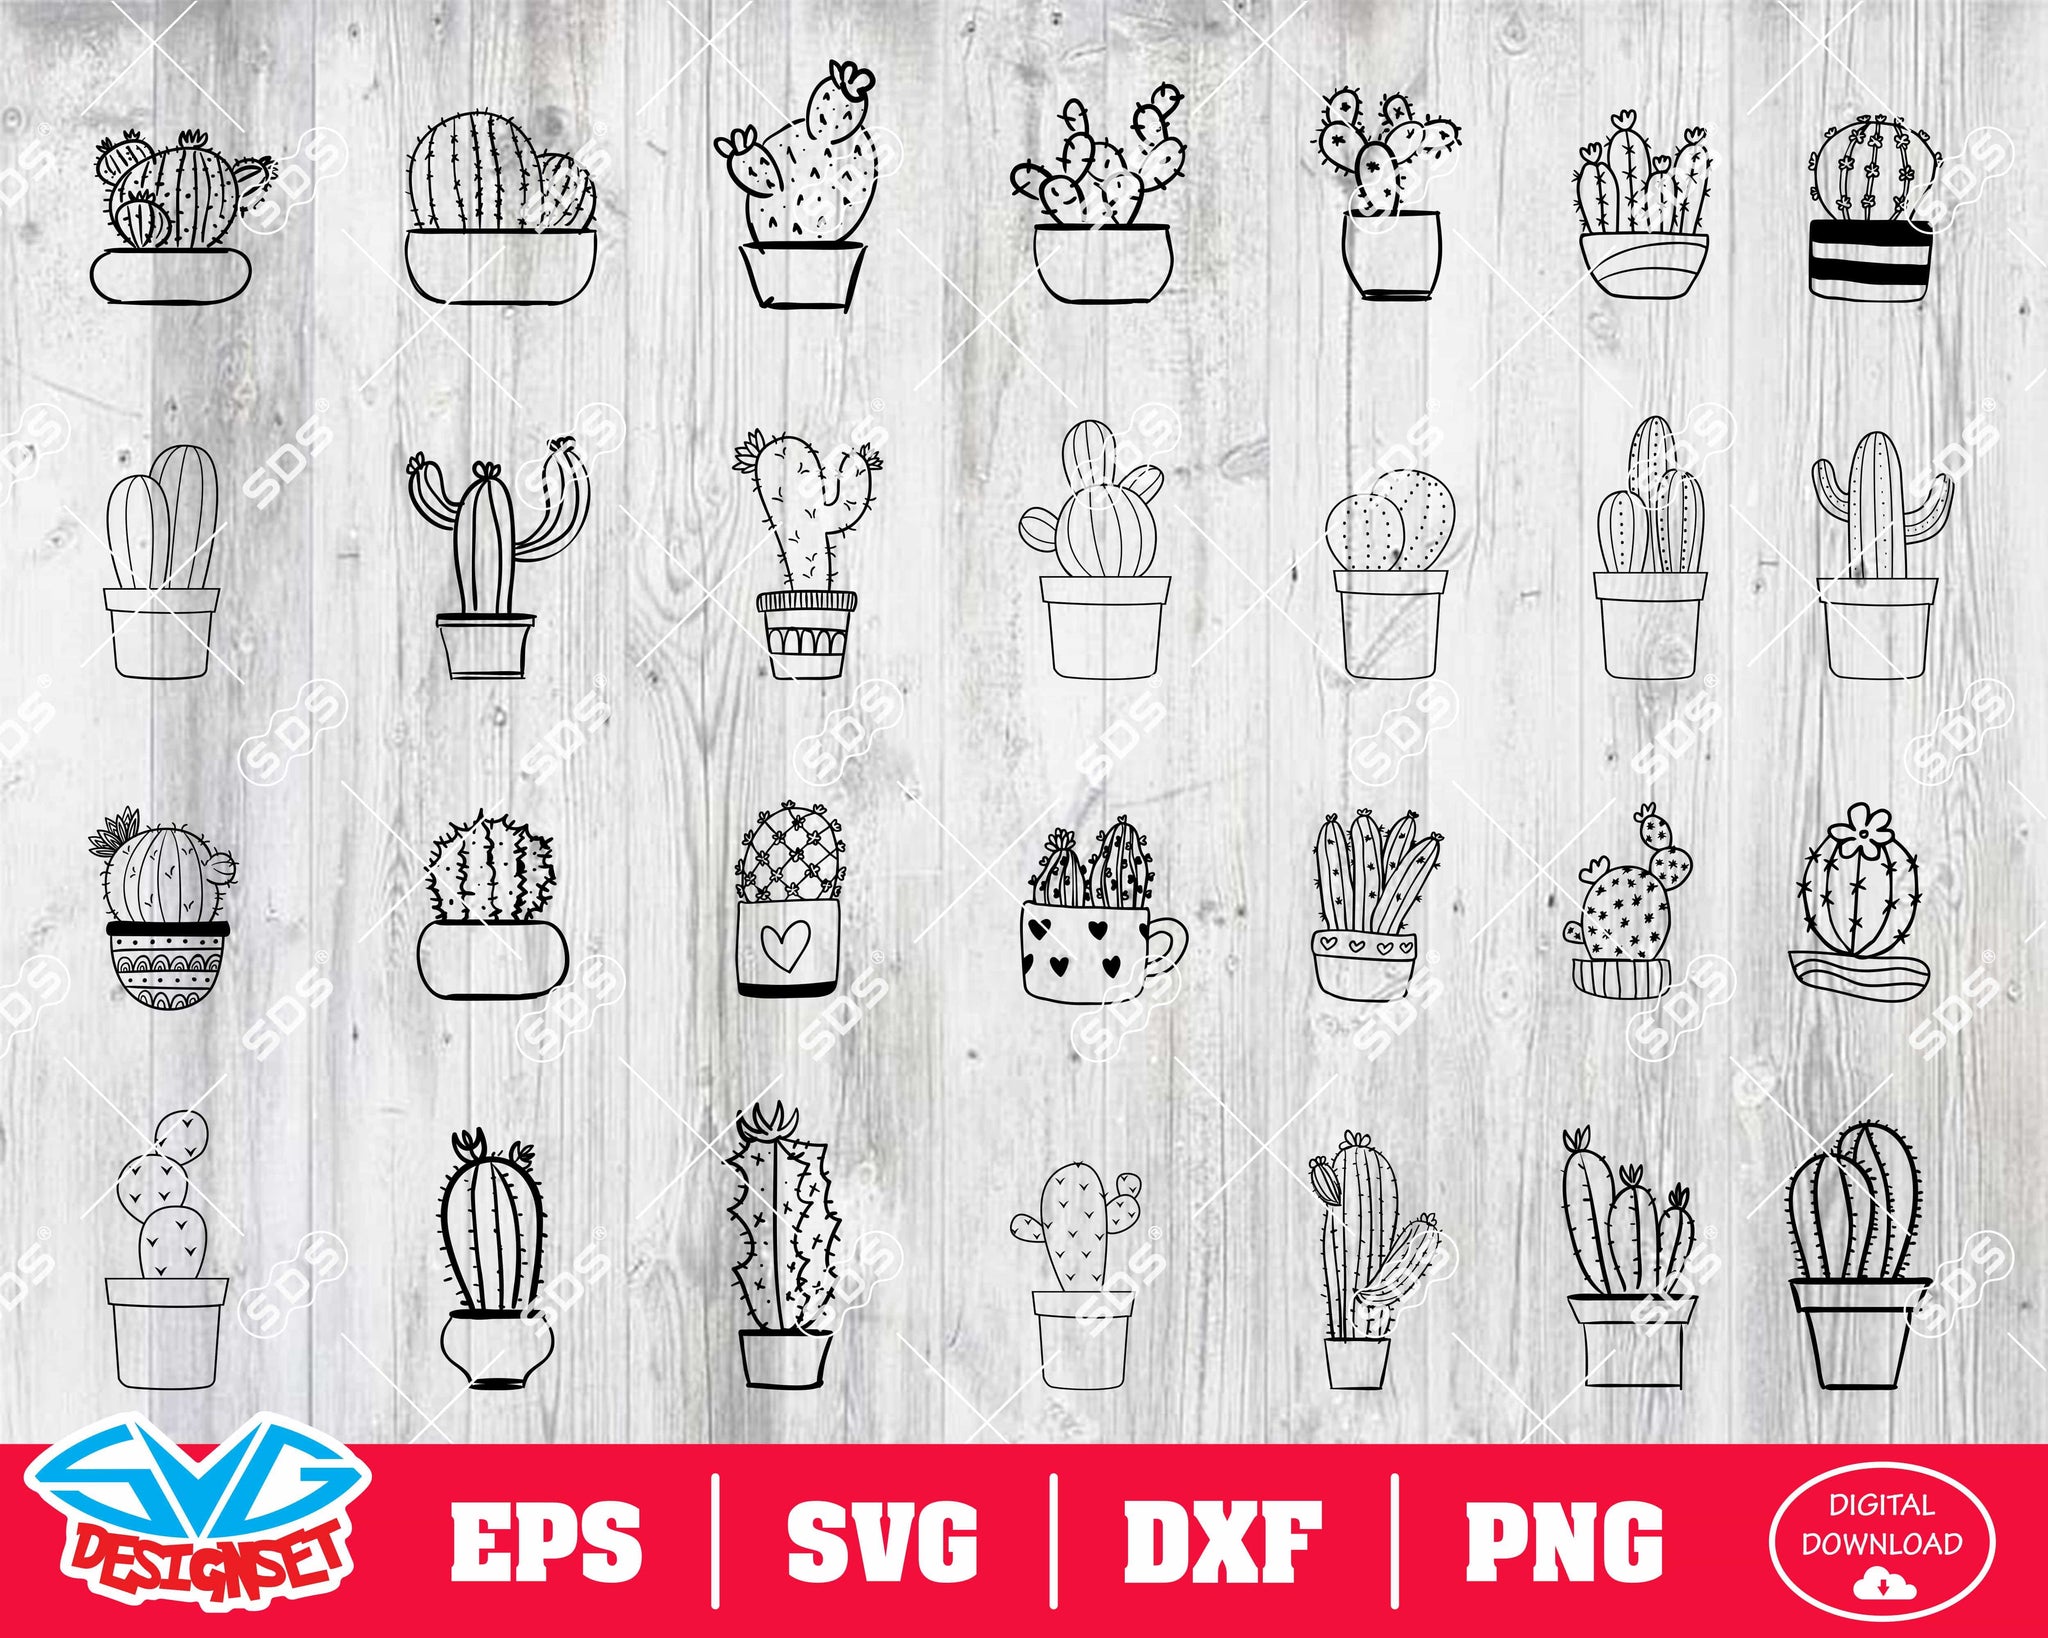 Cactus Svg, Dxf, Eps, Png, Clipart, Silhouette and Cutfiles - SVGDesignSets